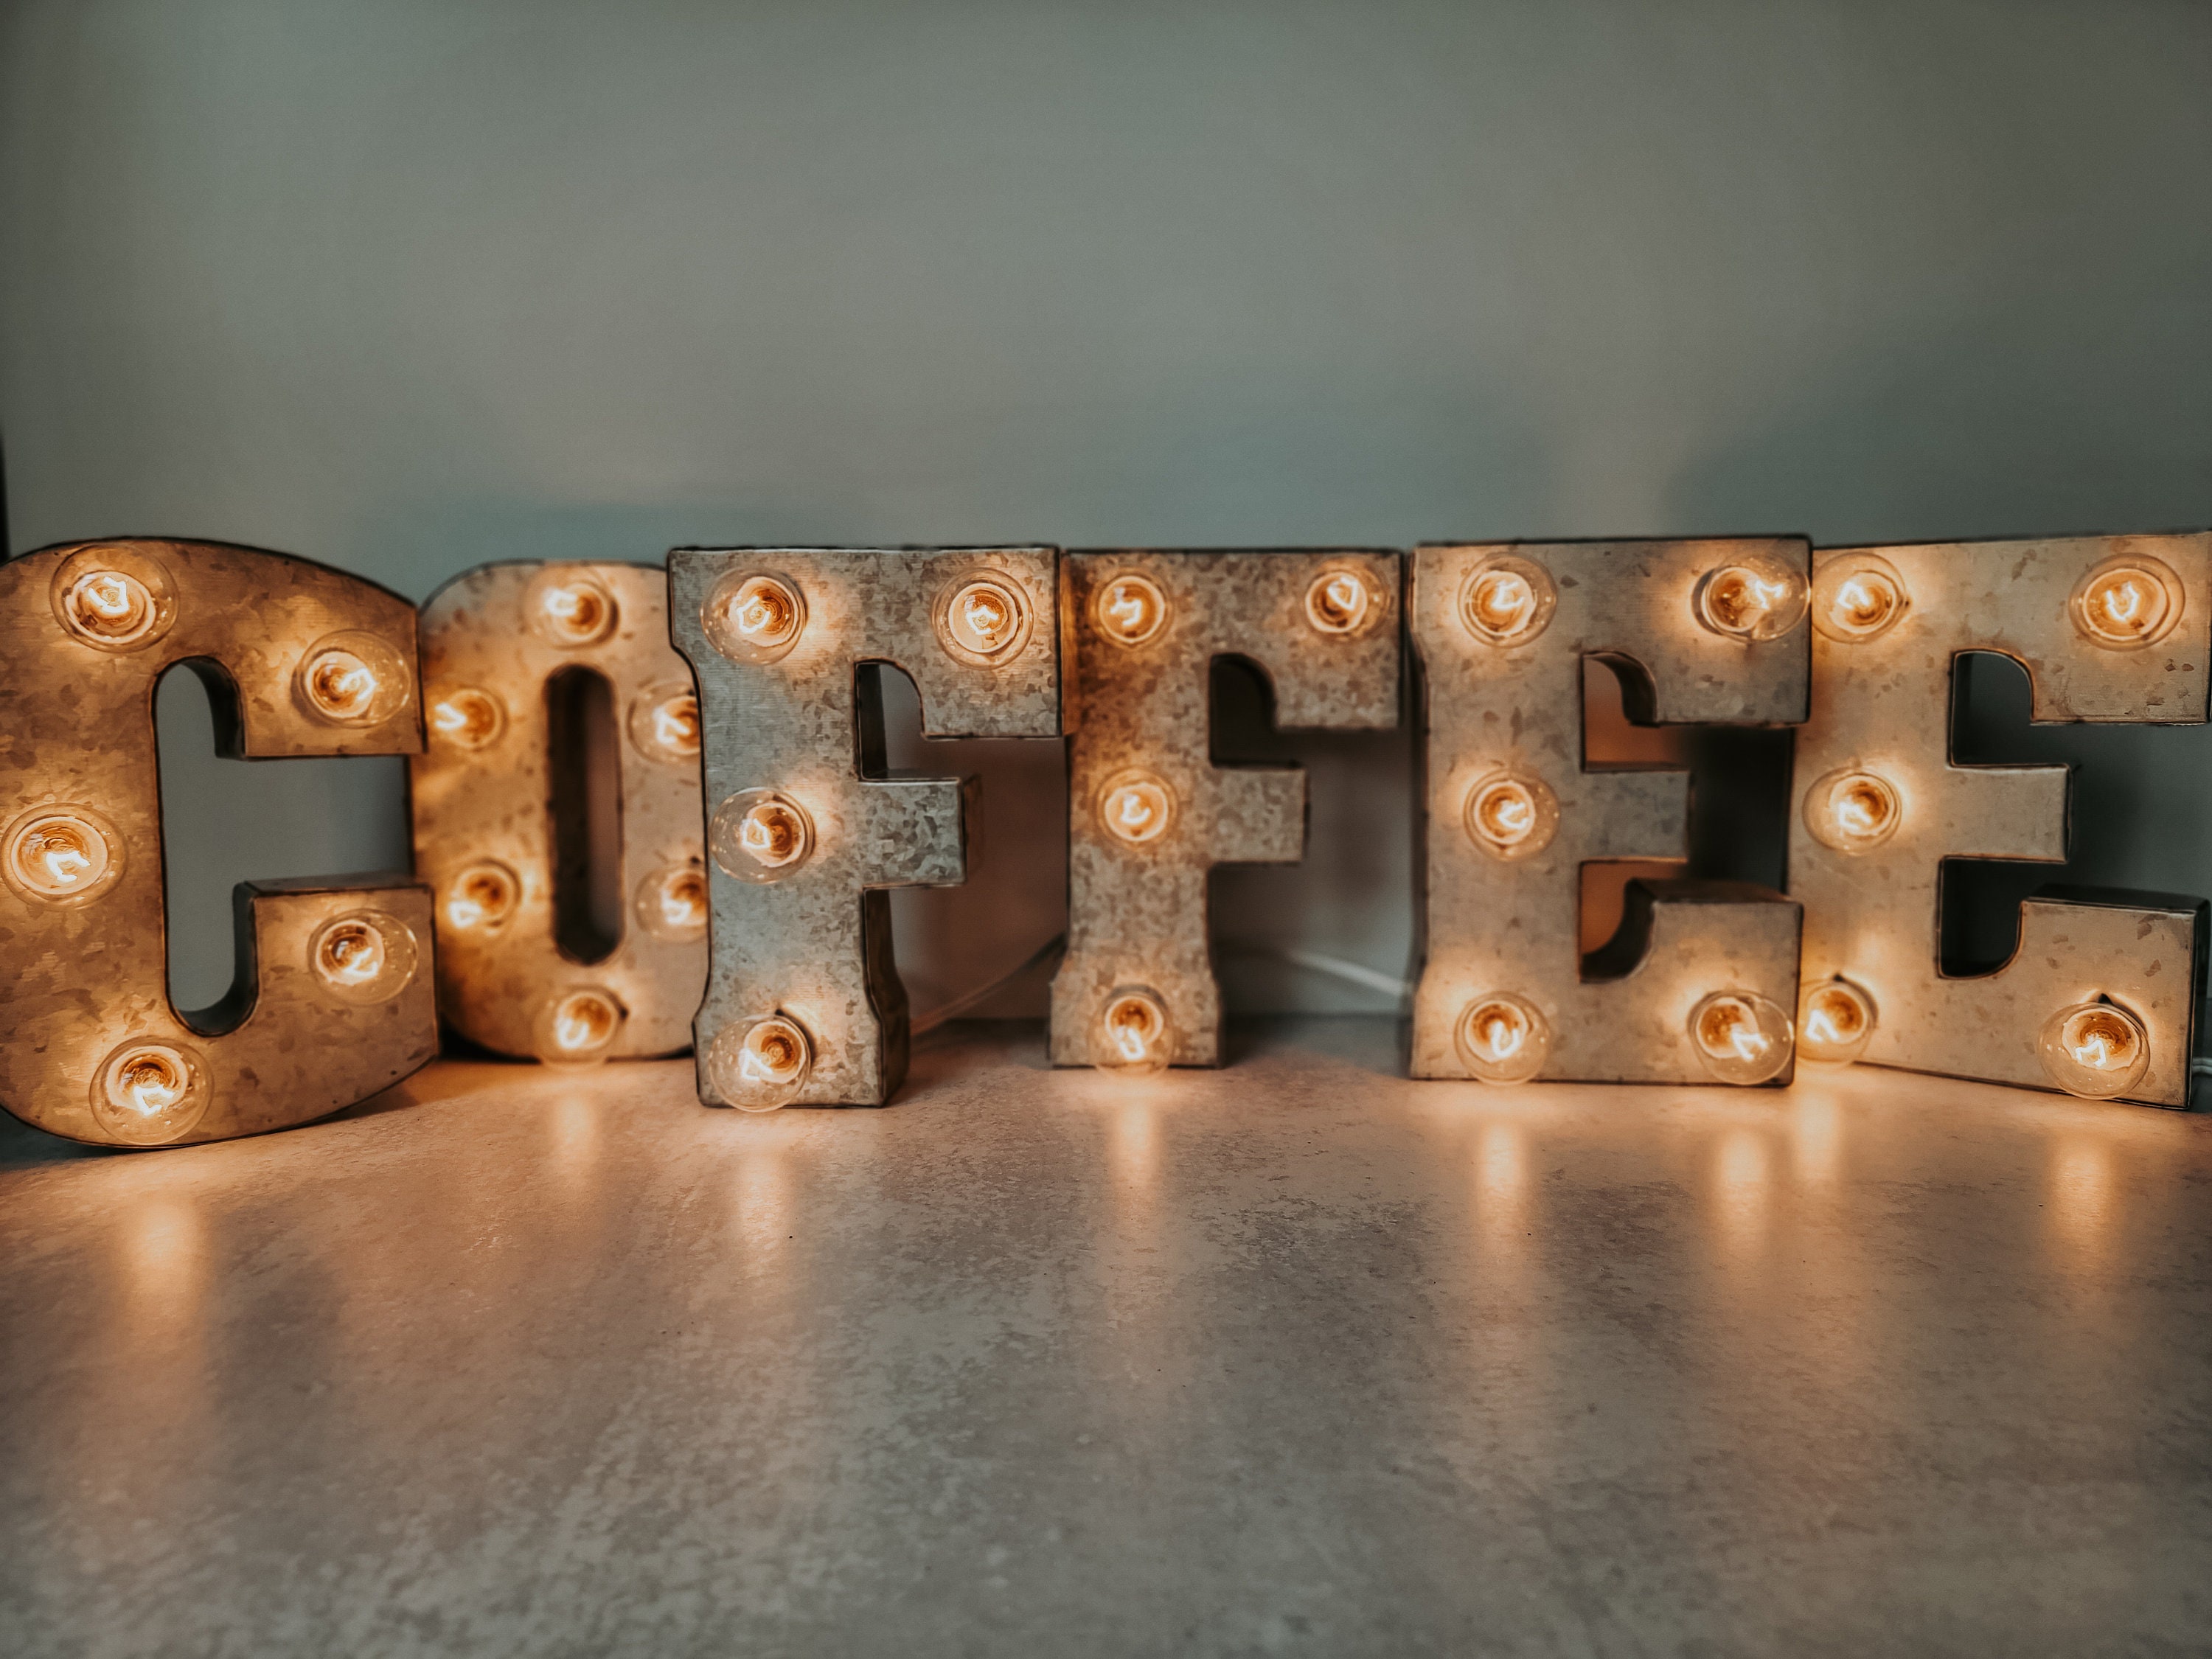 COFFEE Metal Marquee Letters Light up Bulbs Sign 